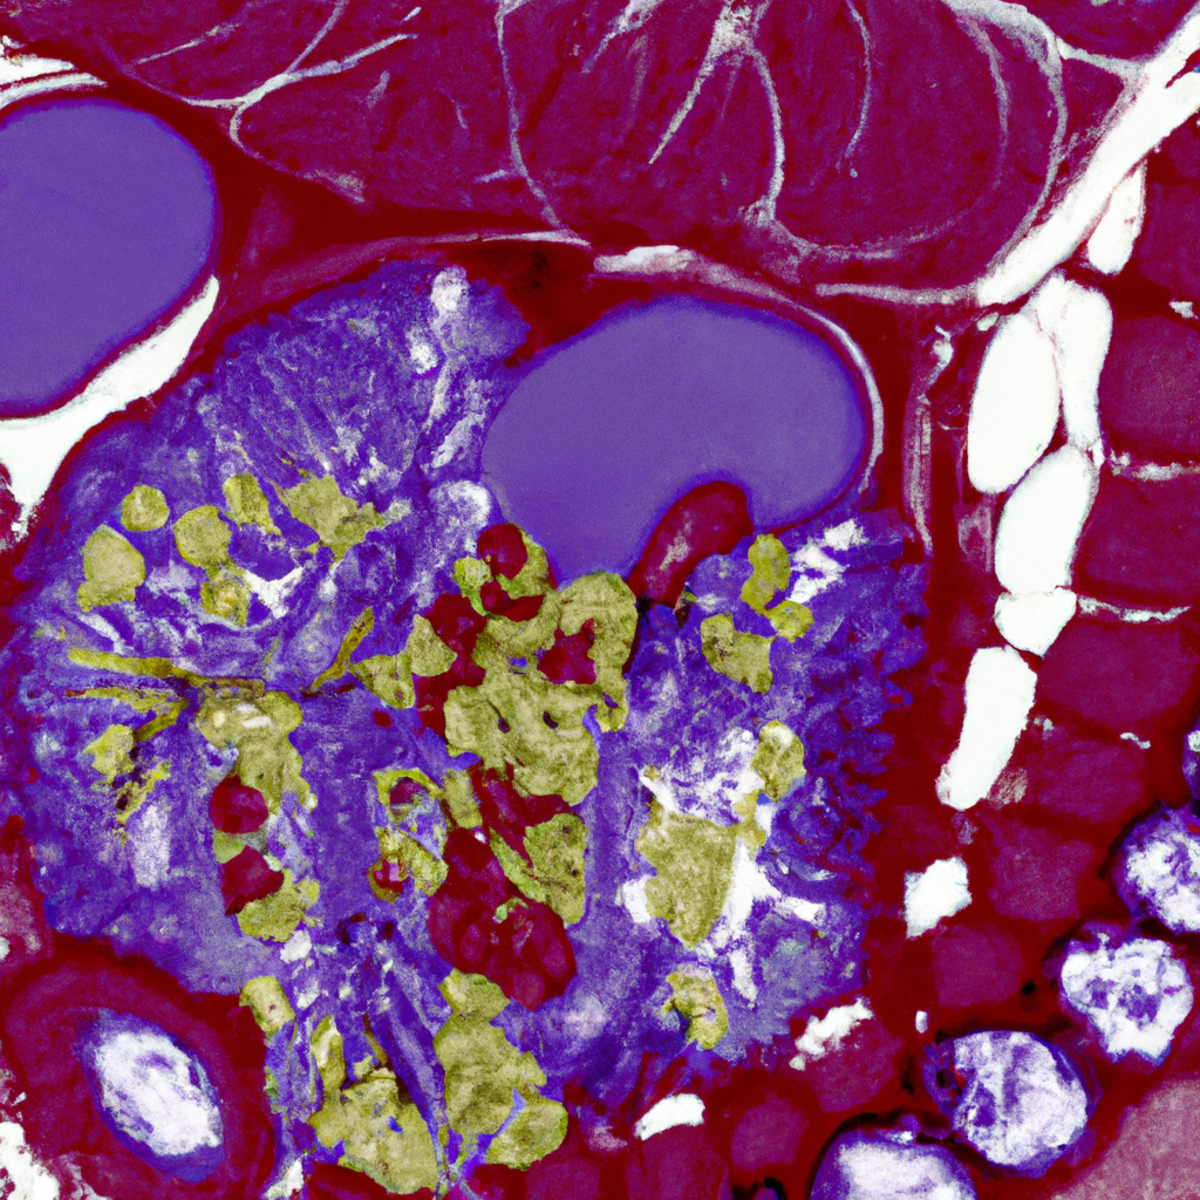 Gallbladder affected by adenomyomatosis, showcasing intricate details of abnormal growths and vibrant colors.